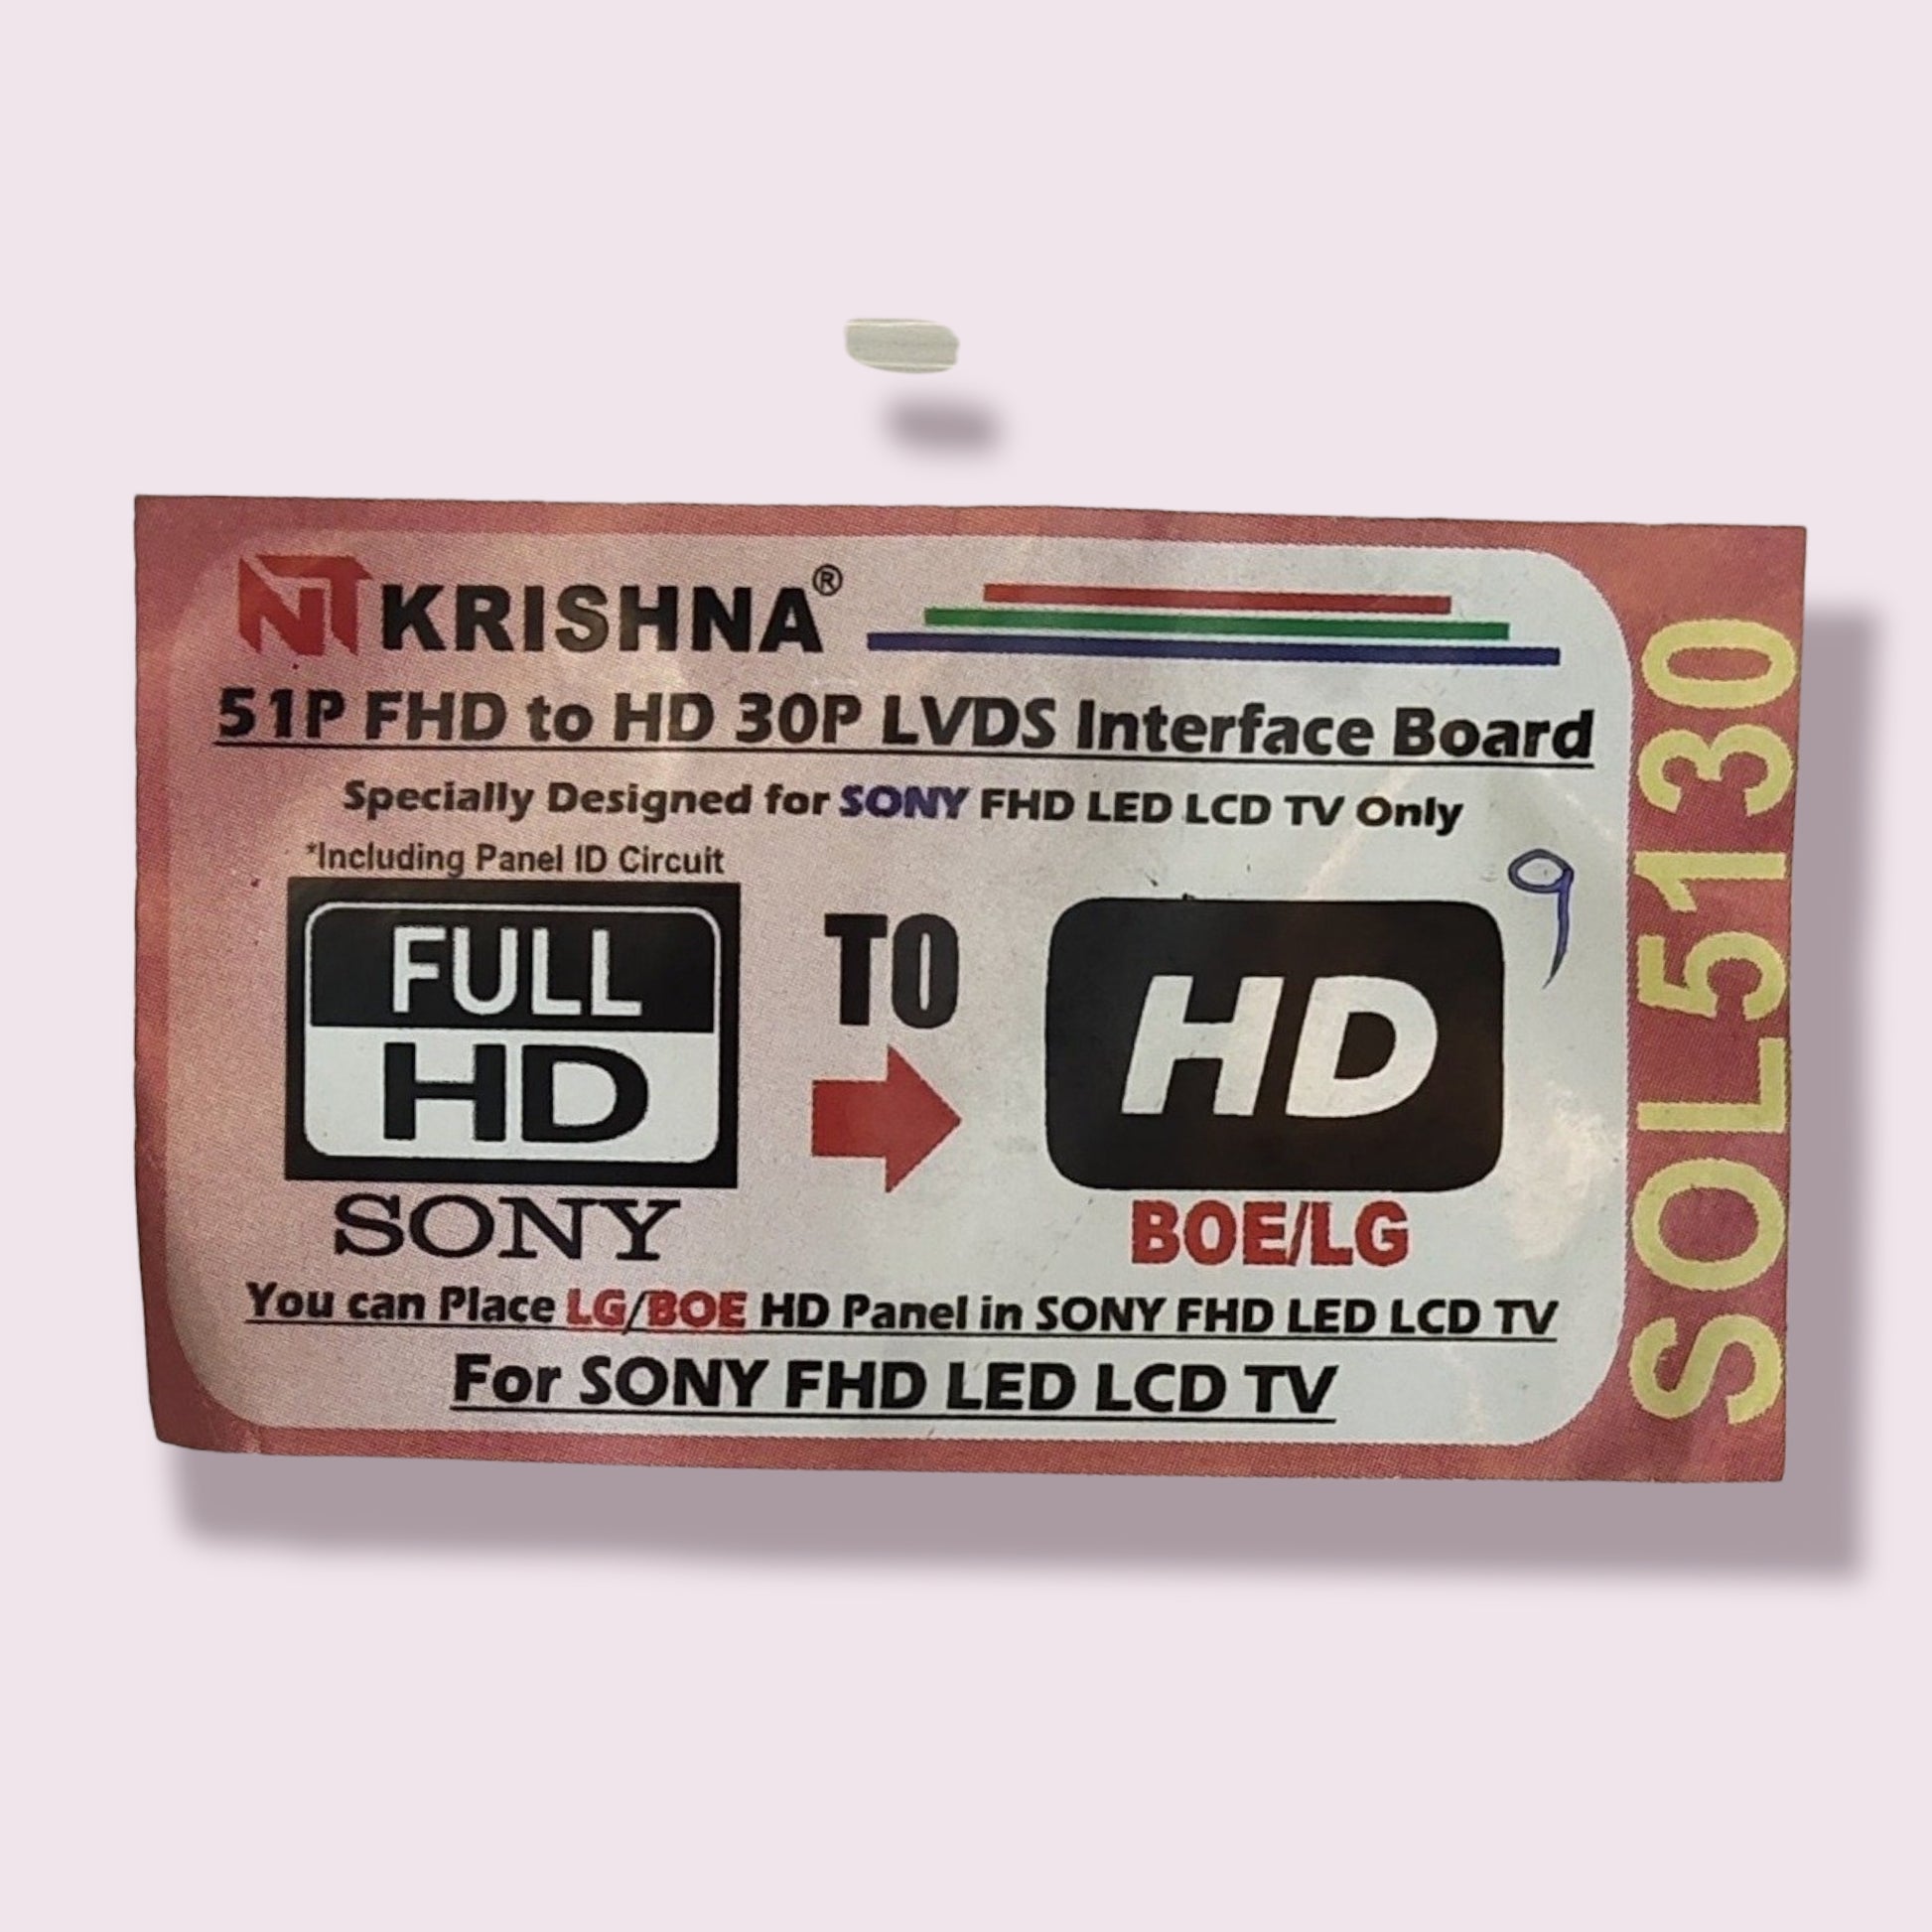 Sony to BOE/LG 51P FHD to 30P HD LVDS Interface Board SOL5130 - Faritha